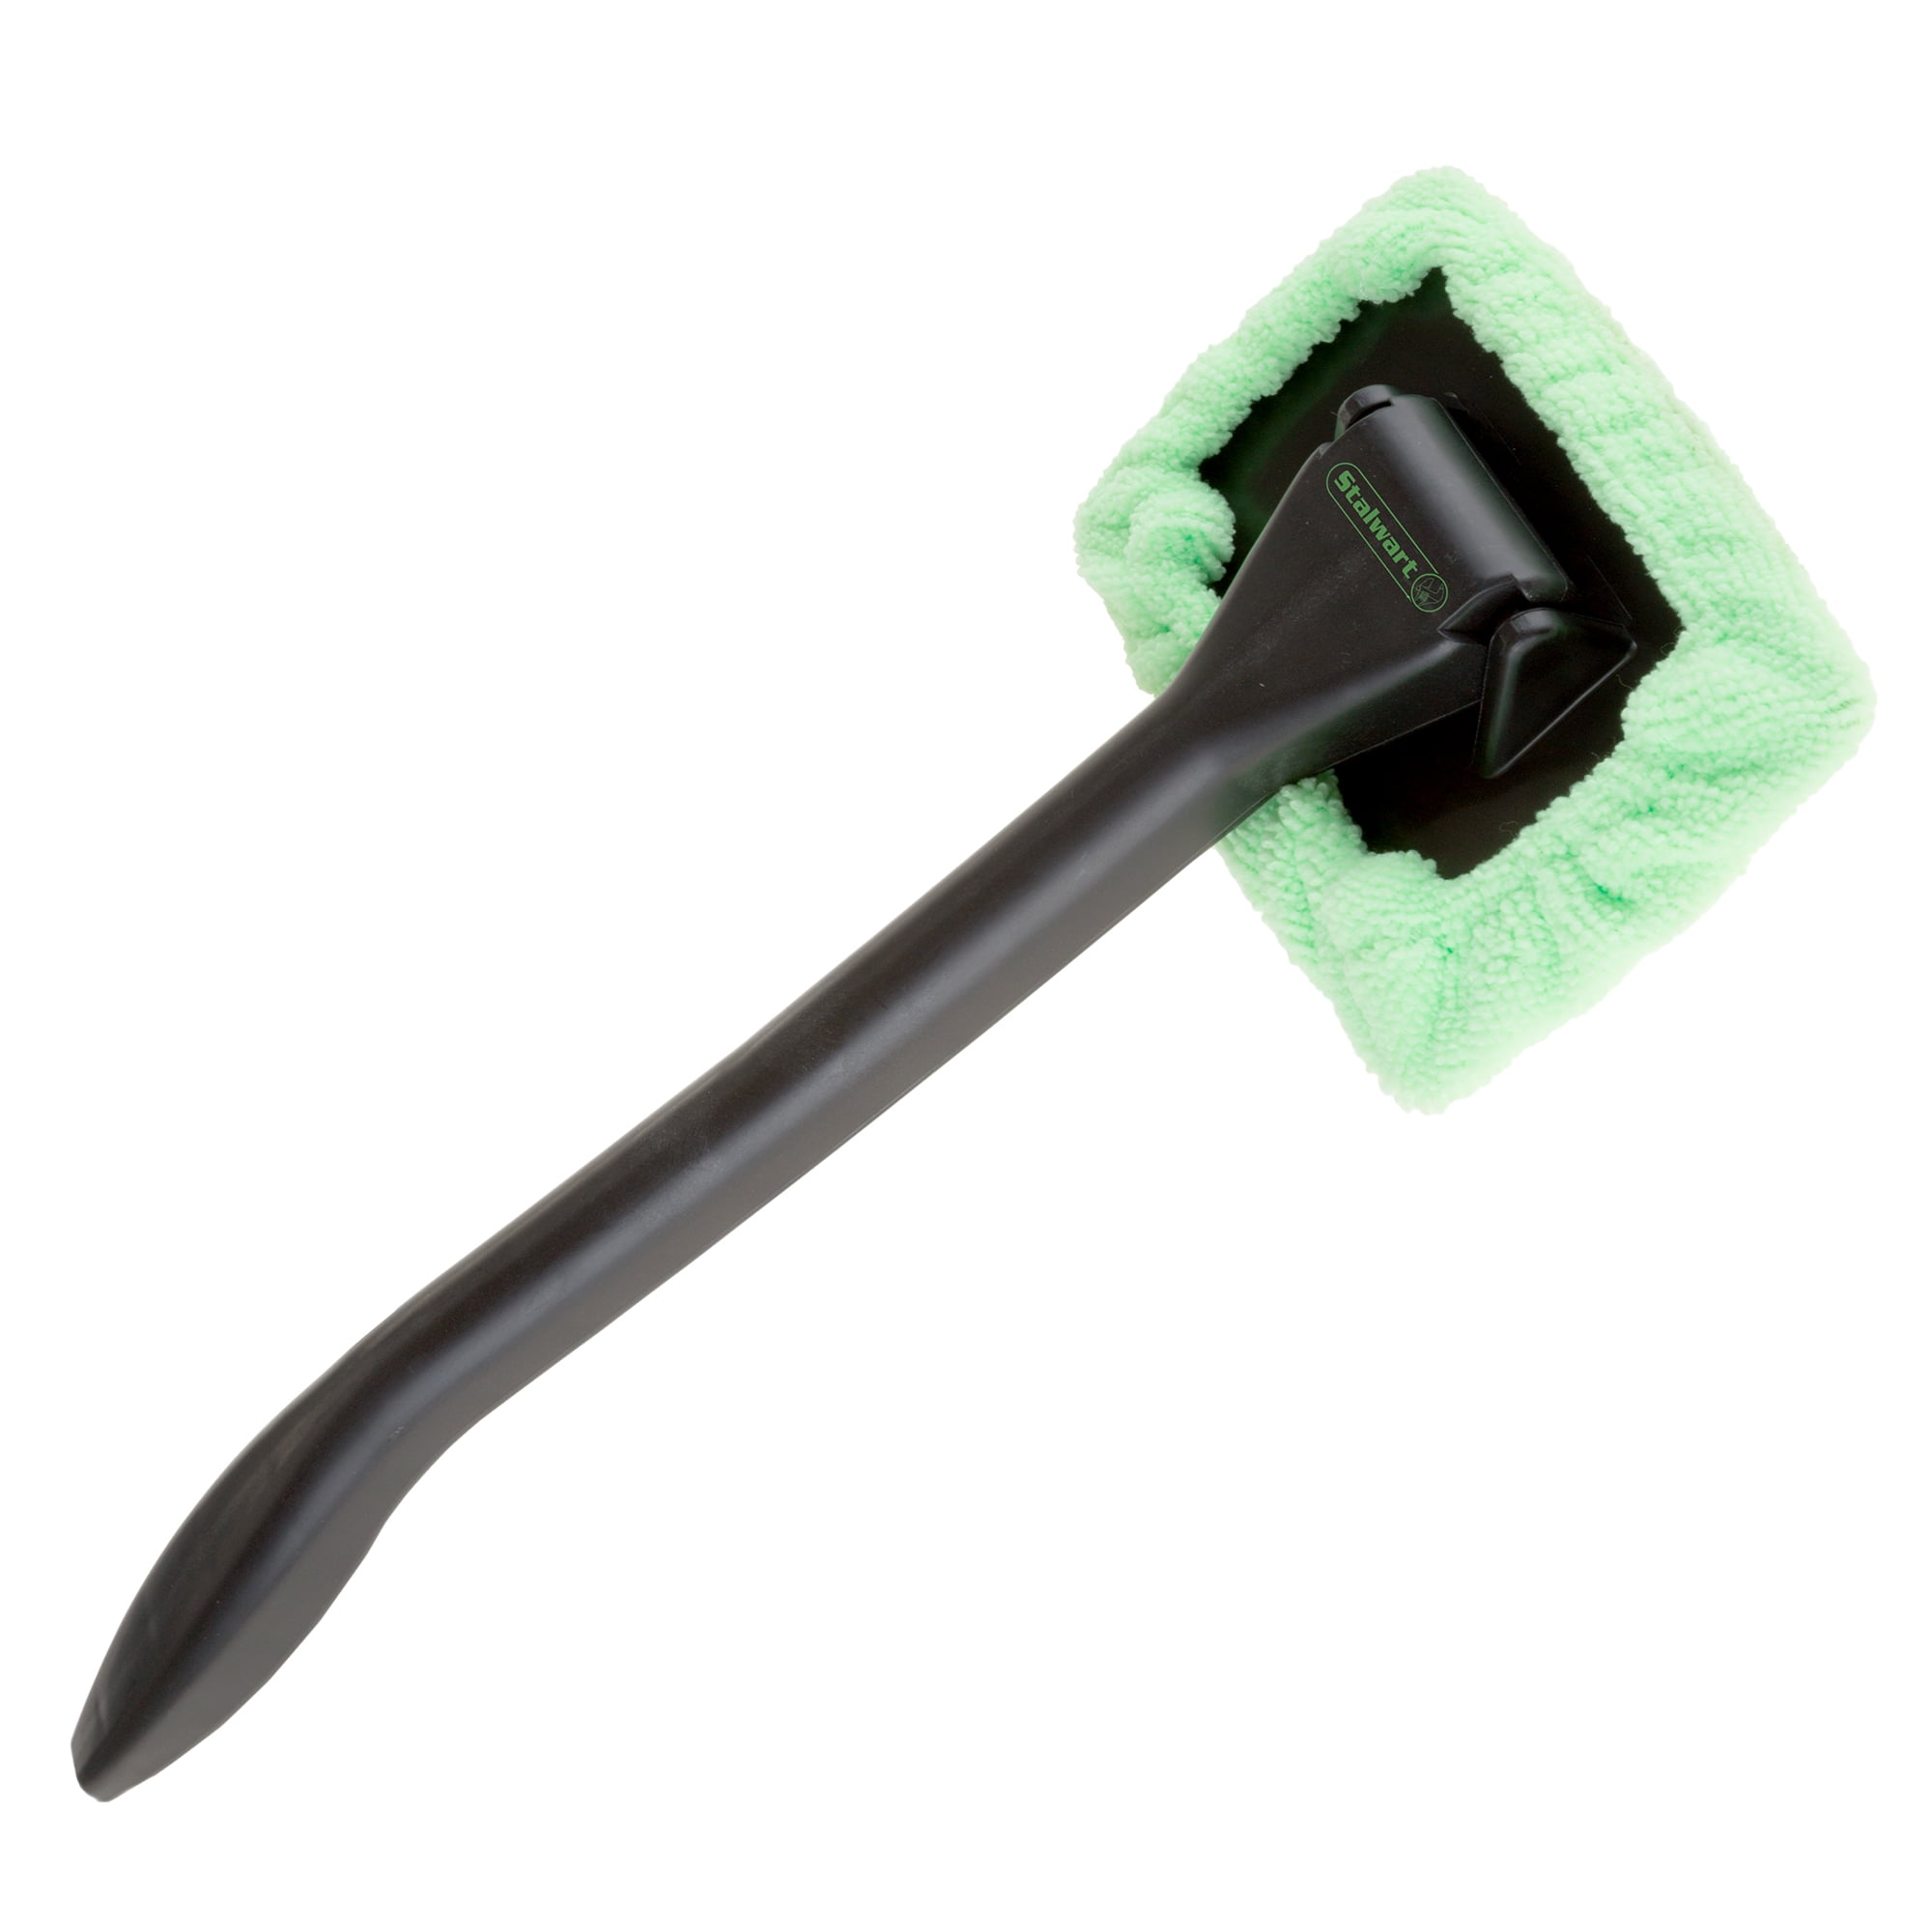 Stalwart Windshield Cleaner with Microfiber Cloth, Handle and Pivoting Head- Glass Washer Cleaning Tool for Windows (Green) (134916ADC)